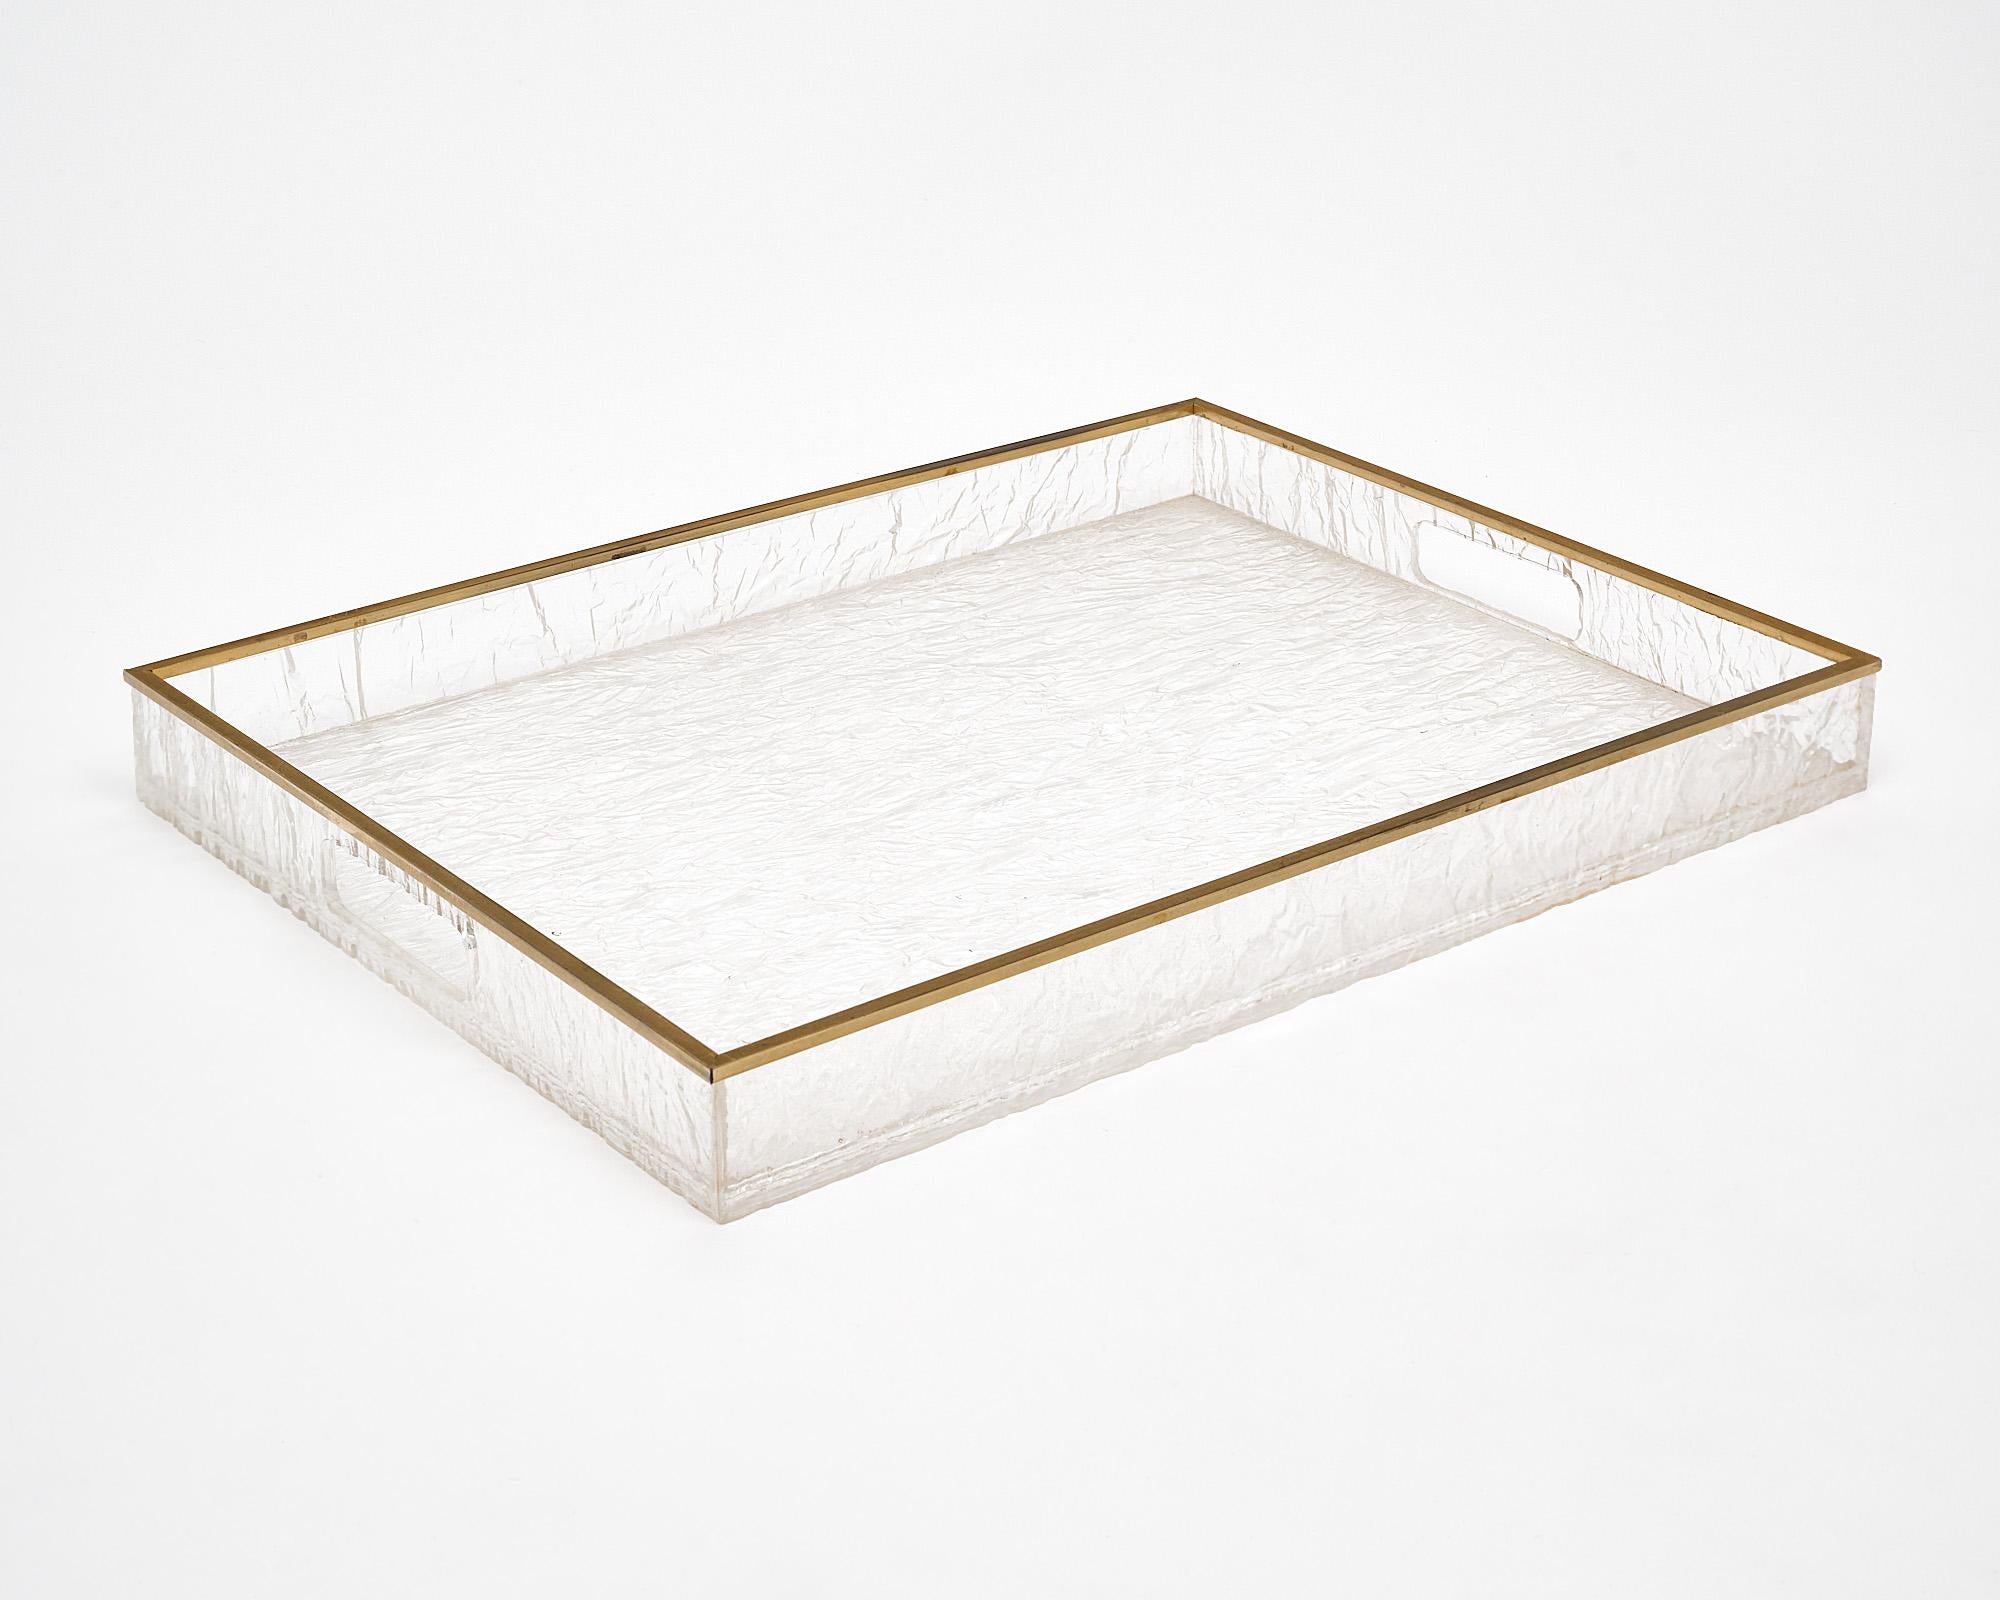 Tray table from France featuring a Lucite x-shape base that folds out to support a Lucite tray top. The Lucite tray is framed with brass trim and features a textured pattern throughout the Lucite.
